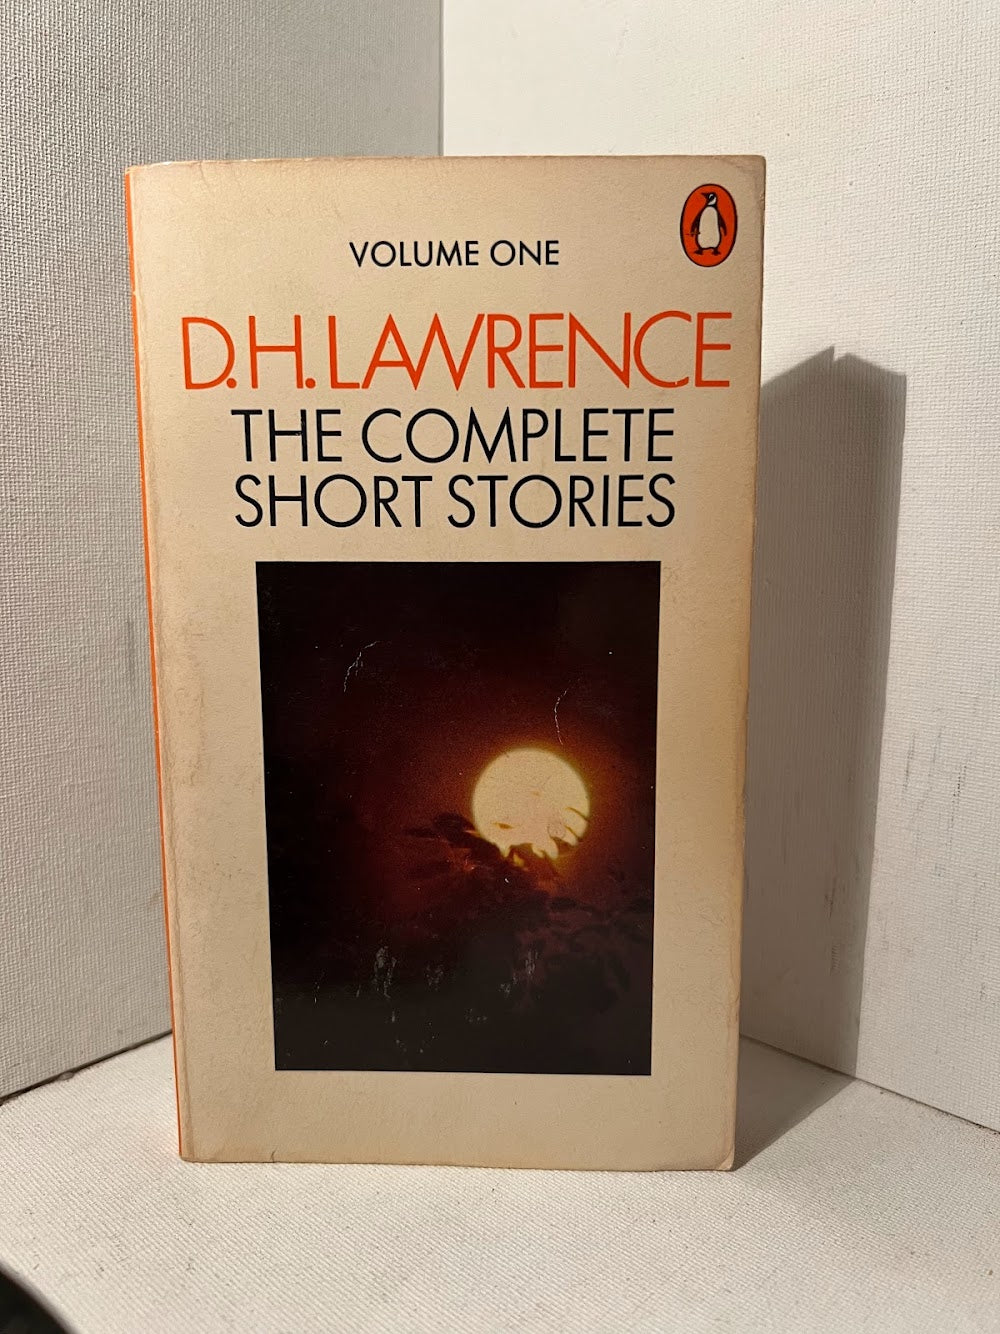 The Complete Short Stories by D.H. Lawrence